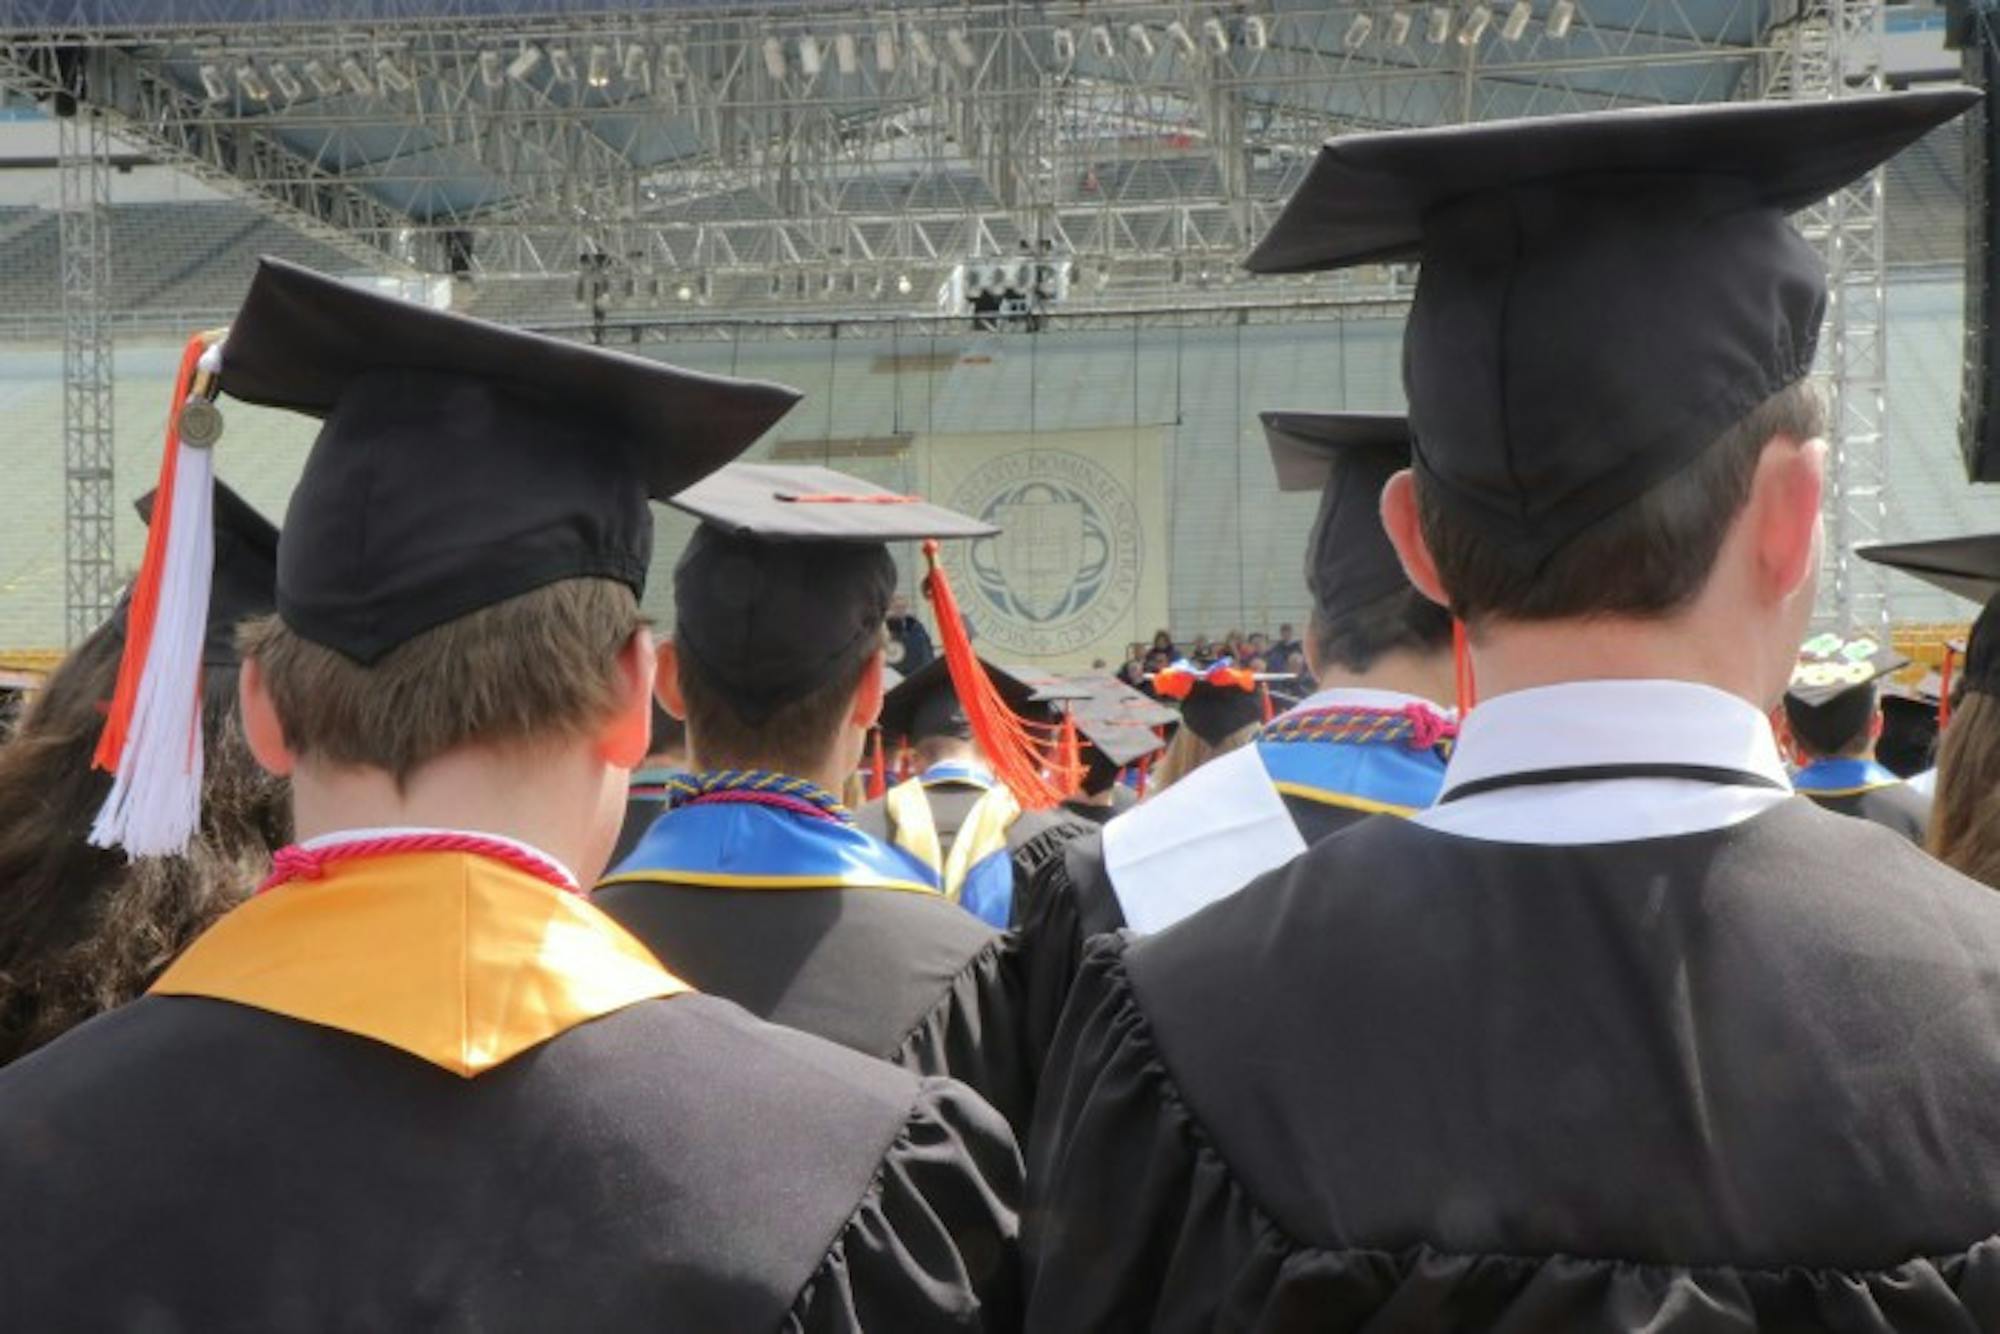 Students sit through the 2017 Commencement ceremony. While the walkout drew national attention, most students and family members did not participate.